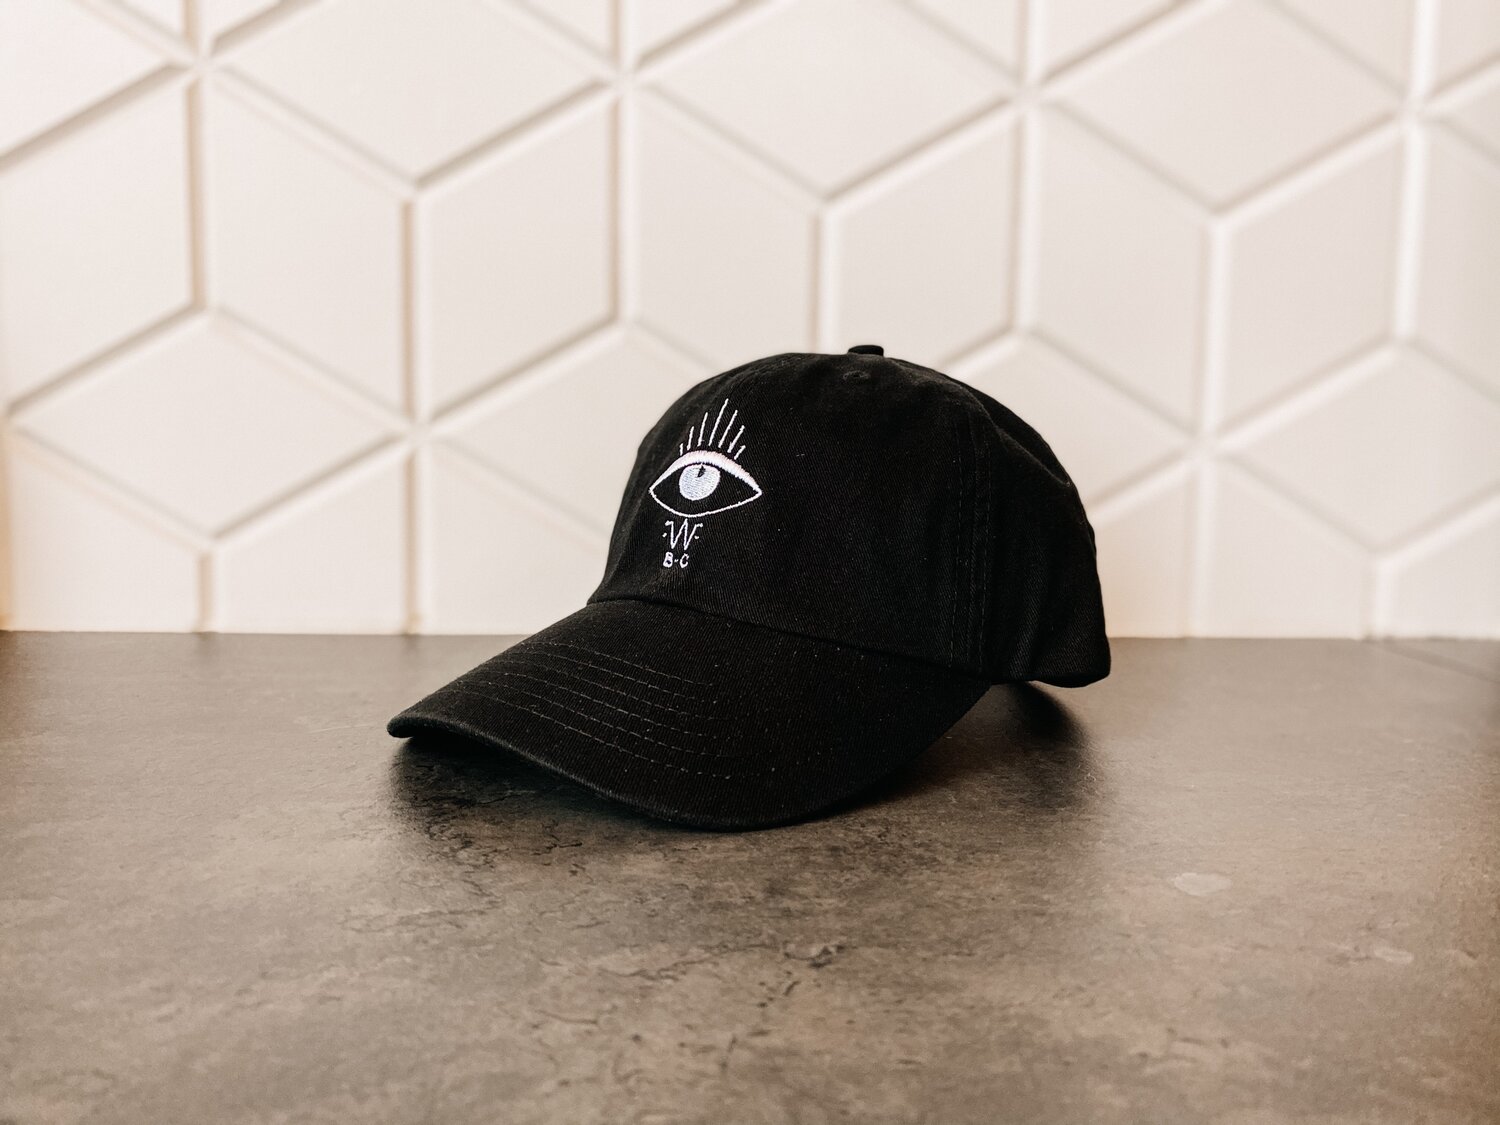 the DAD hat  Wild Brewing Co.